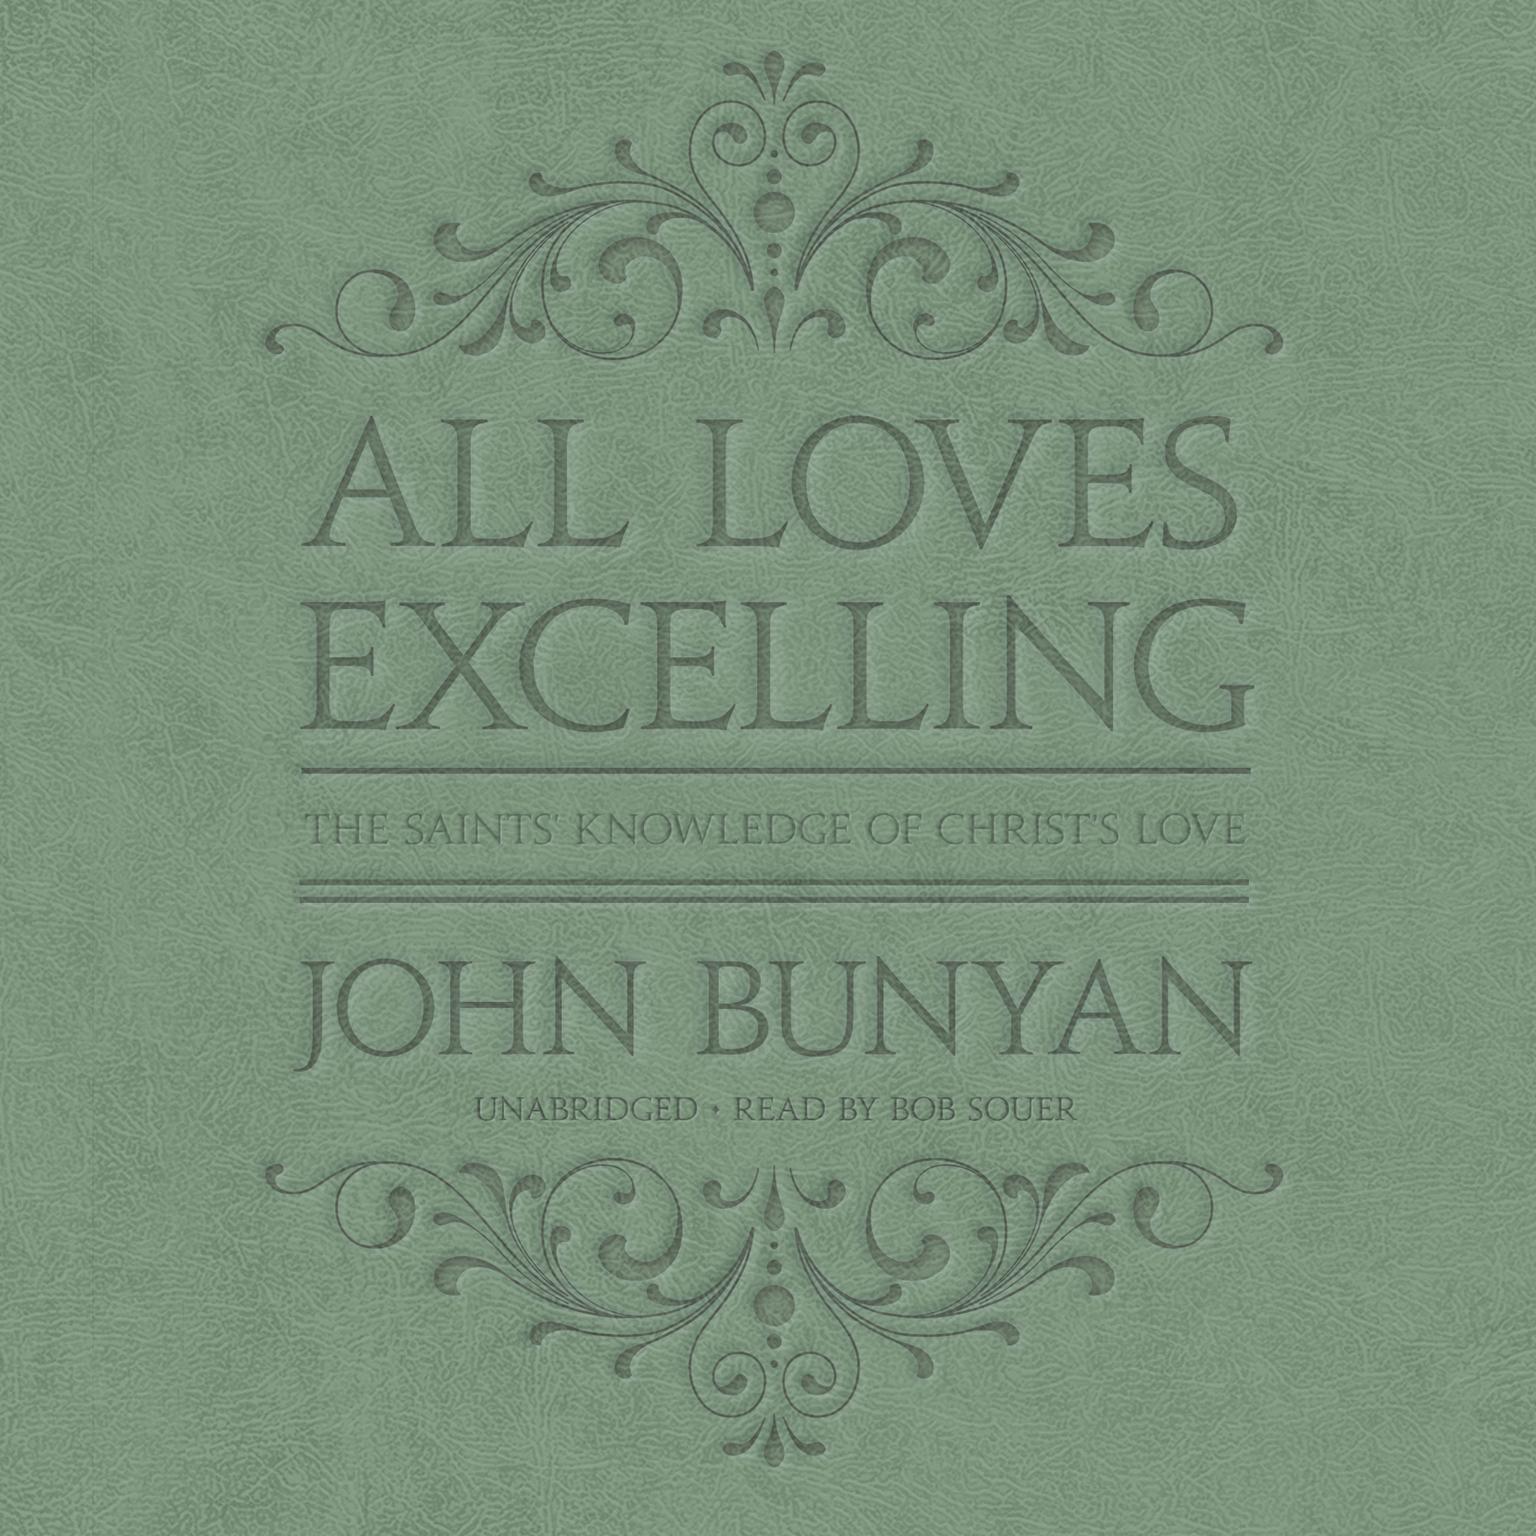 All Loves Excelling: The Saints’ Knowledge of Christ’s Love Audiobook, by John Bunyan